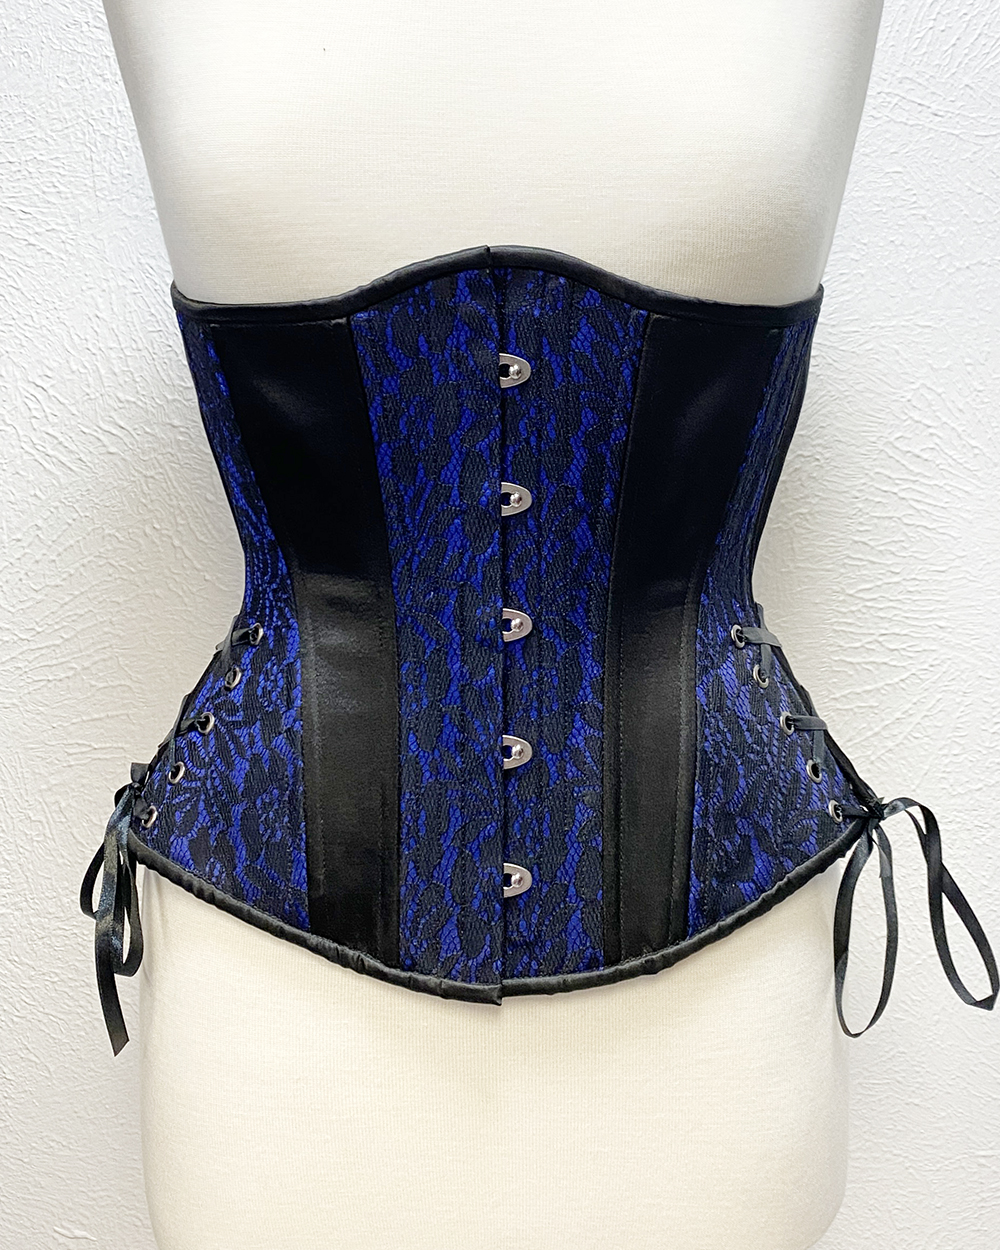 Blue with Black Lace Overlay Hourglass Corset